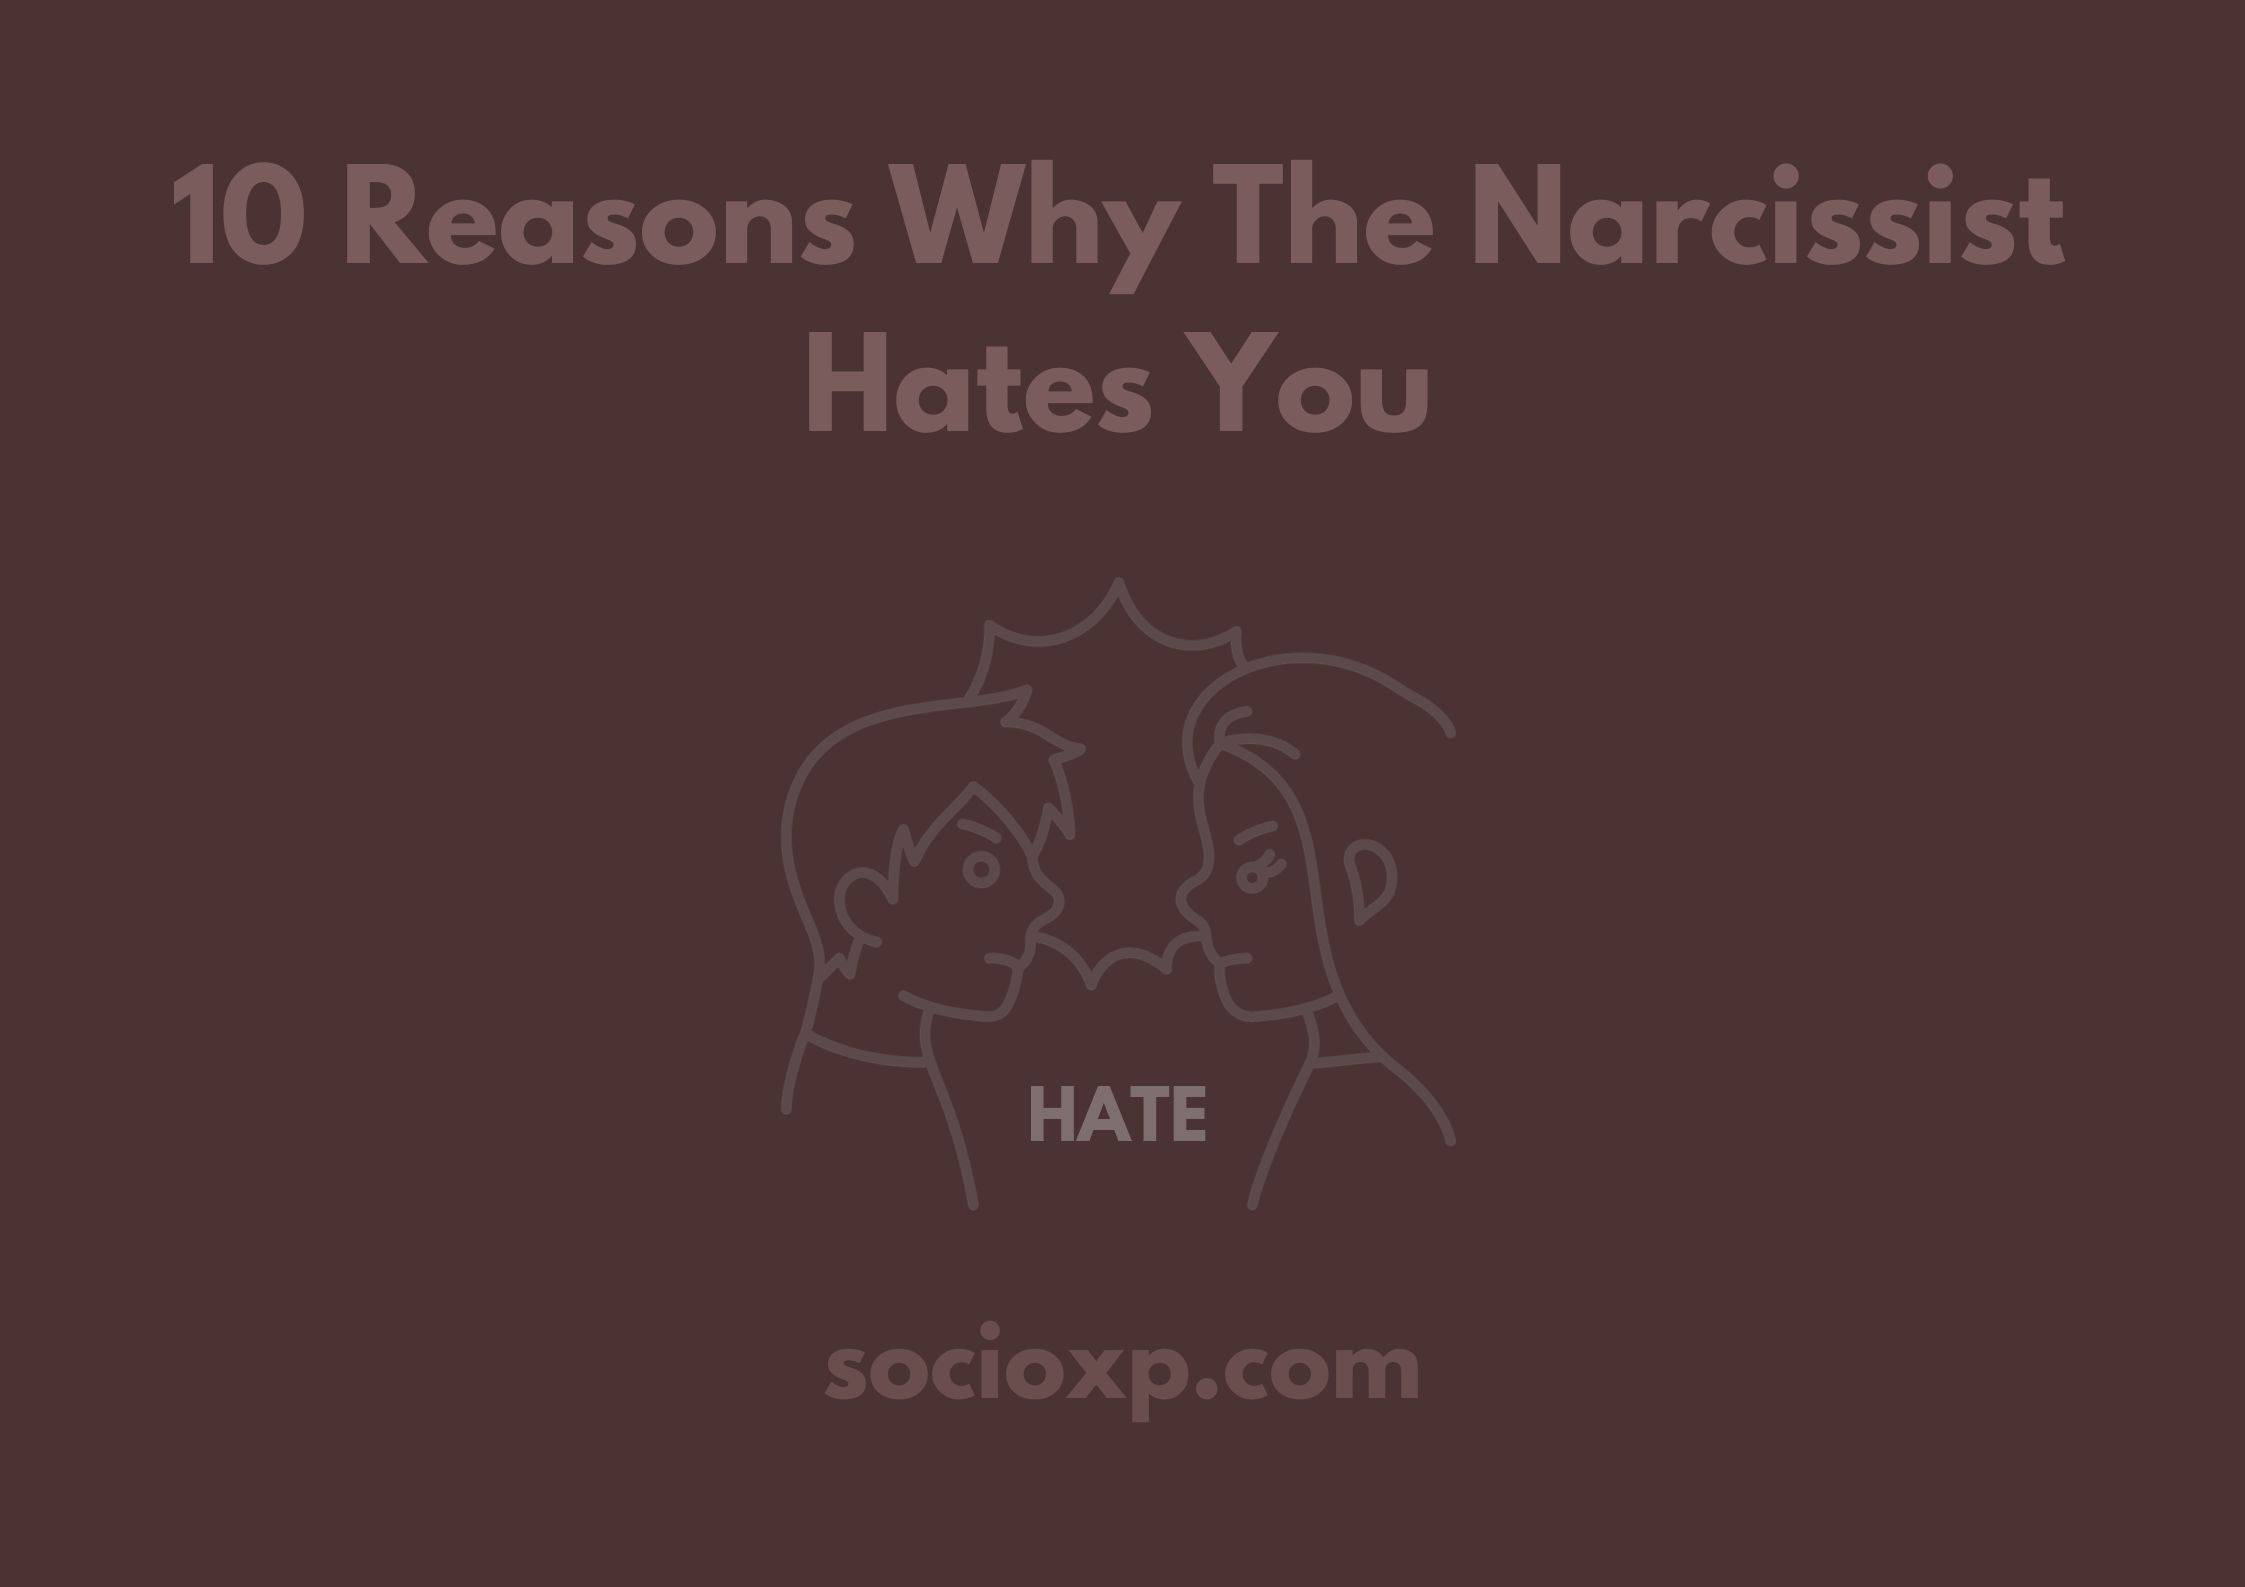 10 Reasons Why The Narcissist Hates You